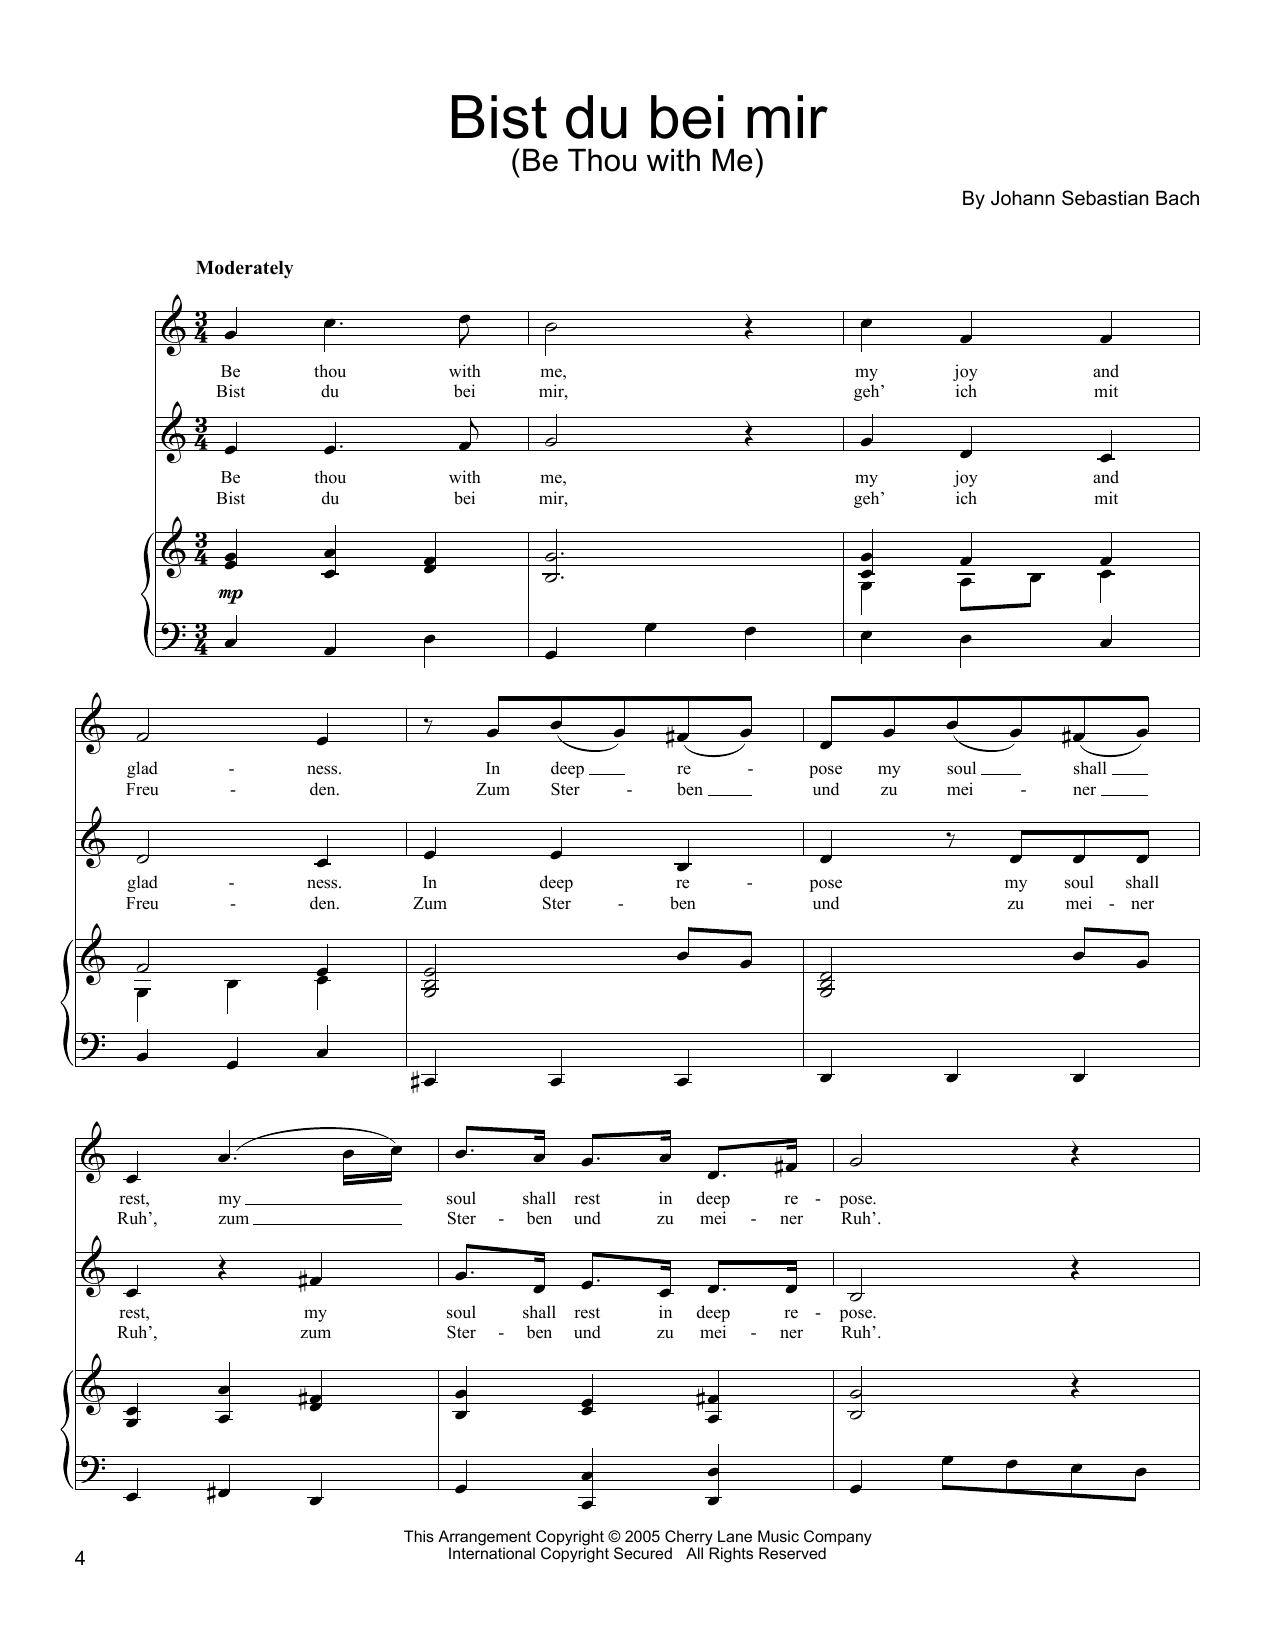 Download J.S. Bach Bist du bei mir (You Are With Me) Sheet Music